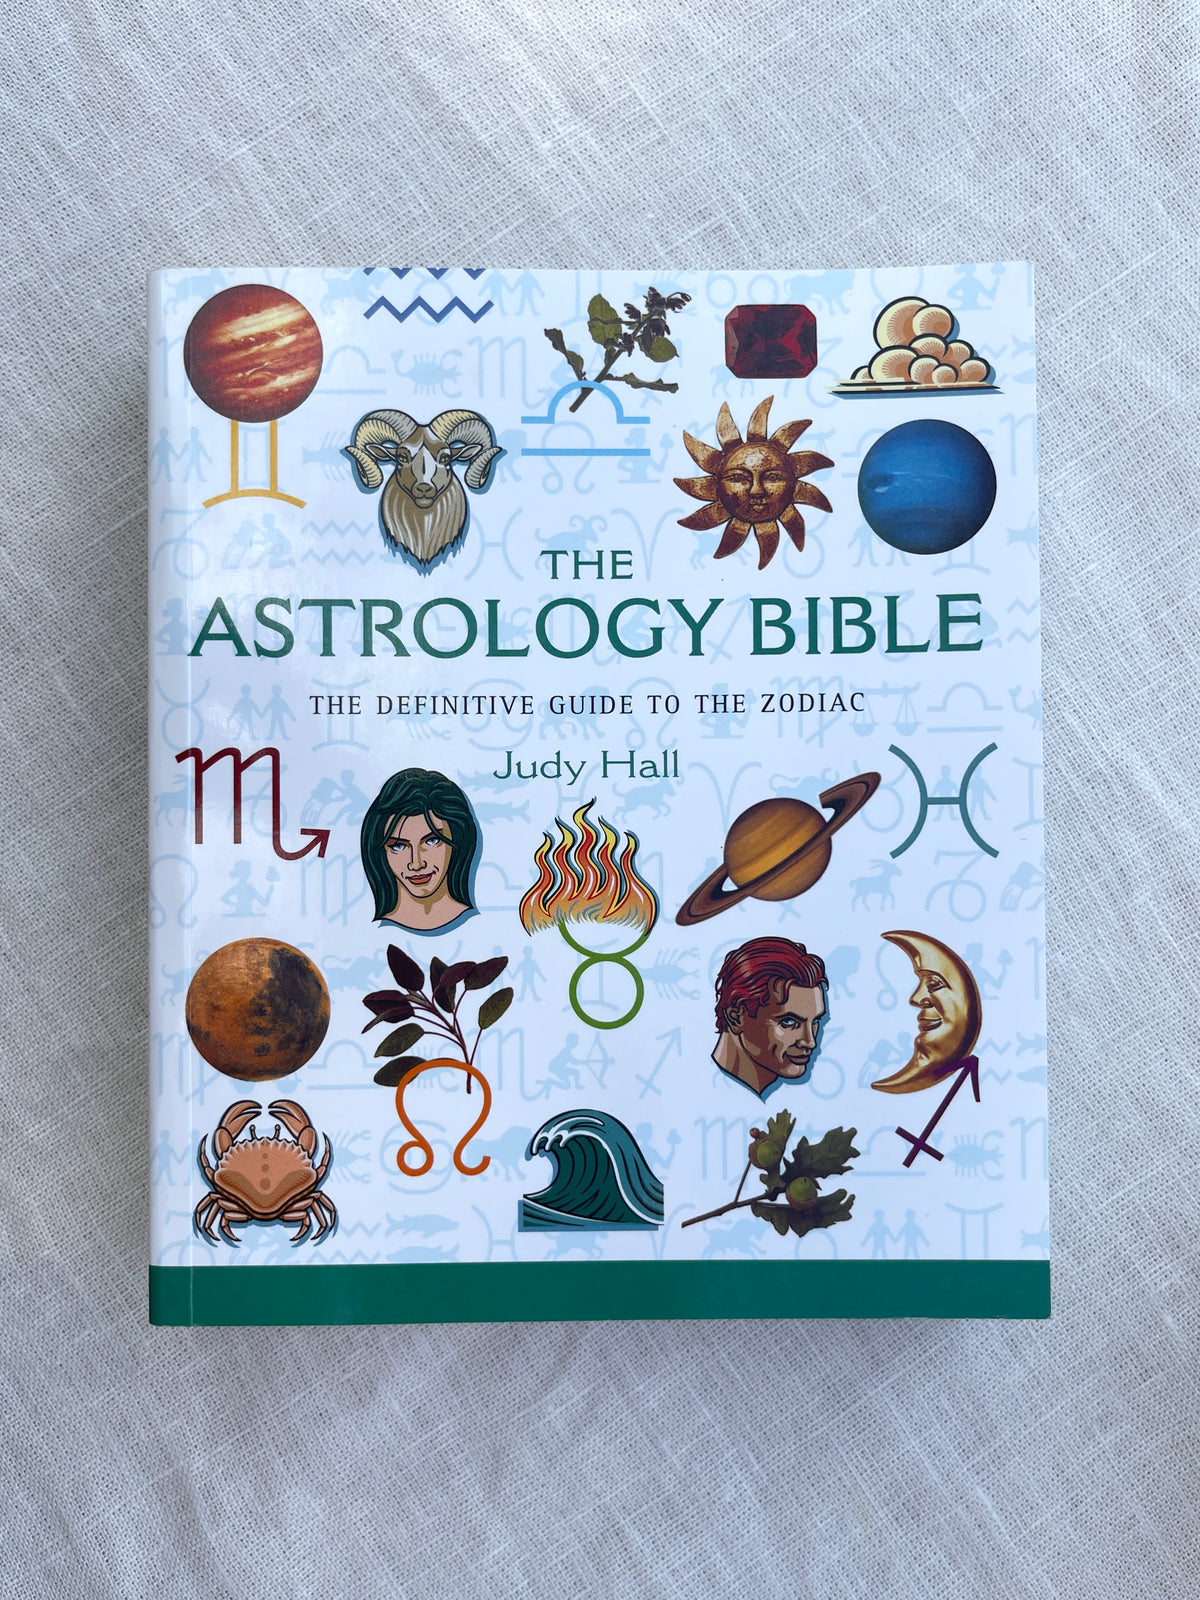 Astrology Bible book the definitive guide to the zodiac by judy hall